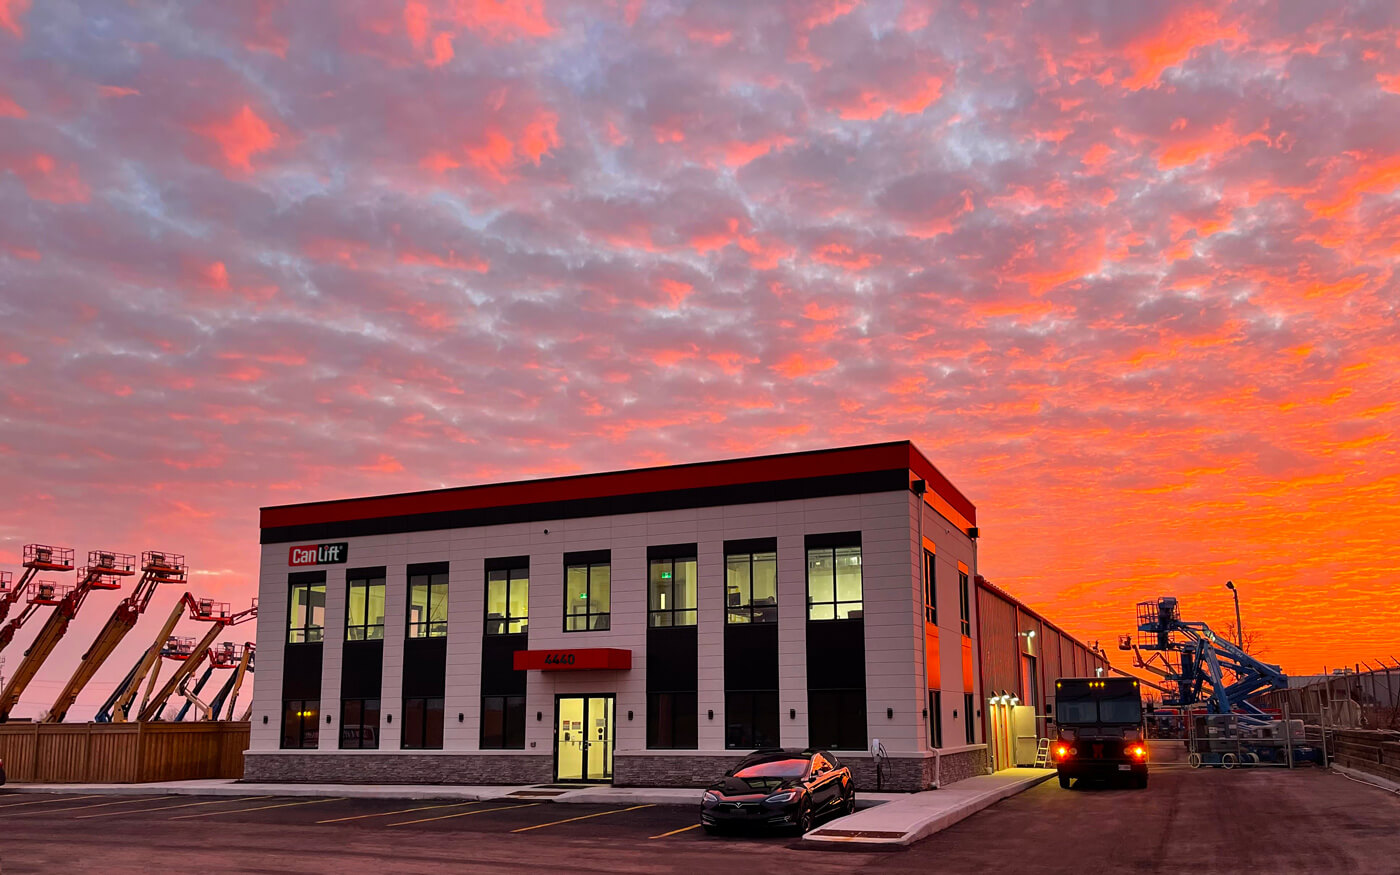 CanLift Building Sunset